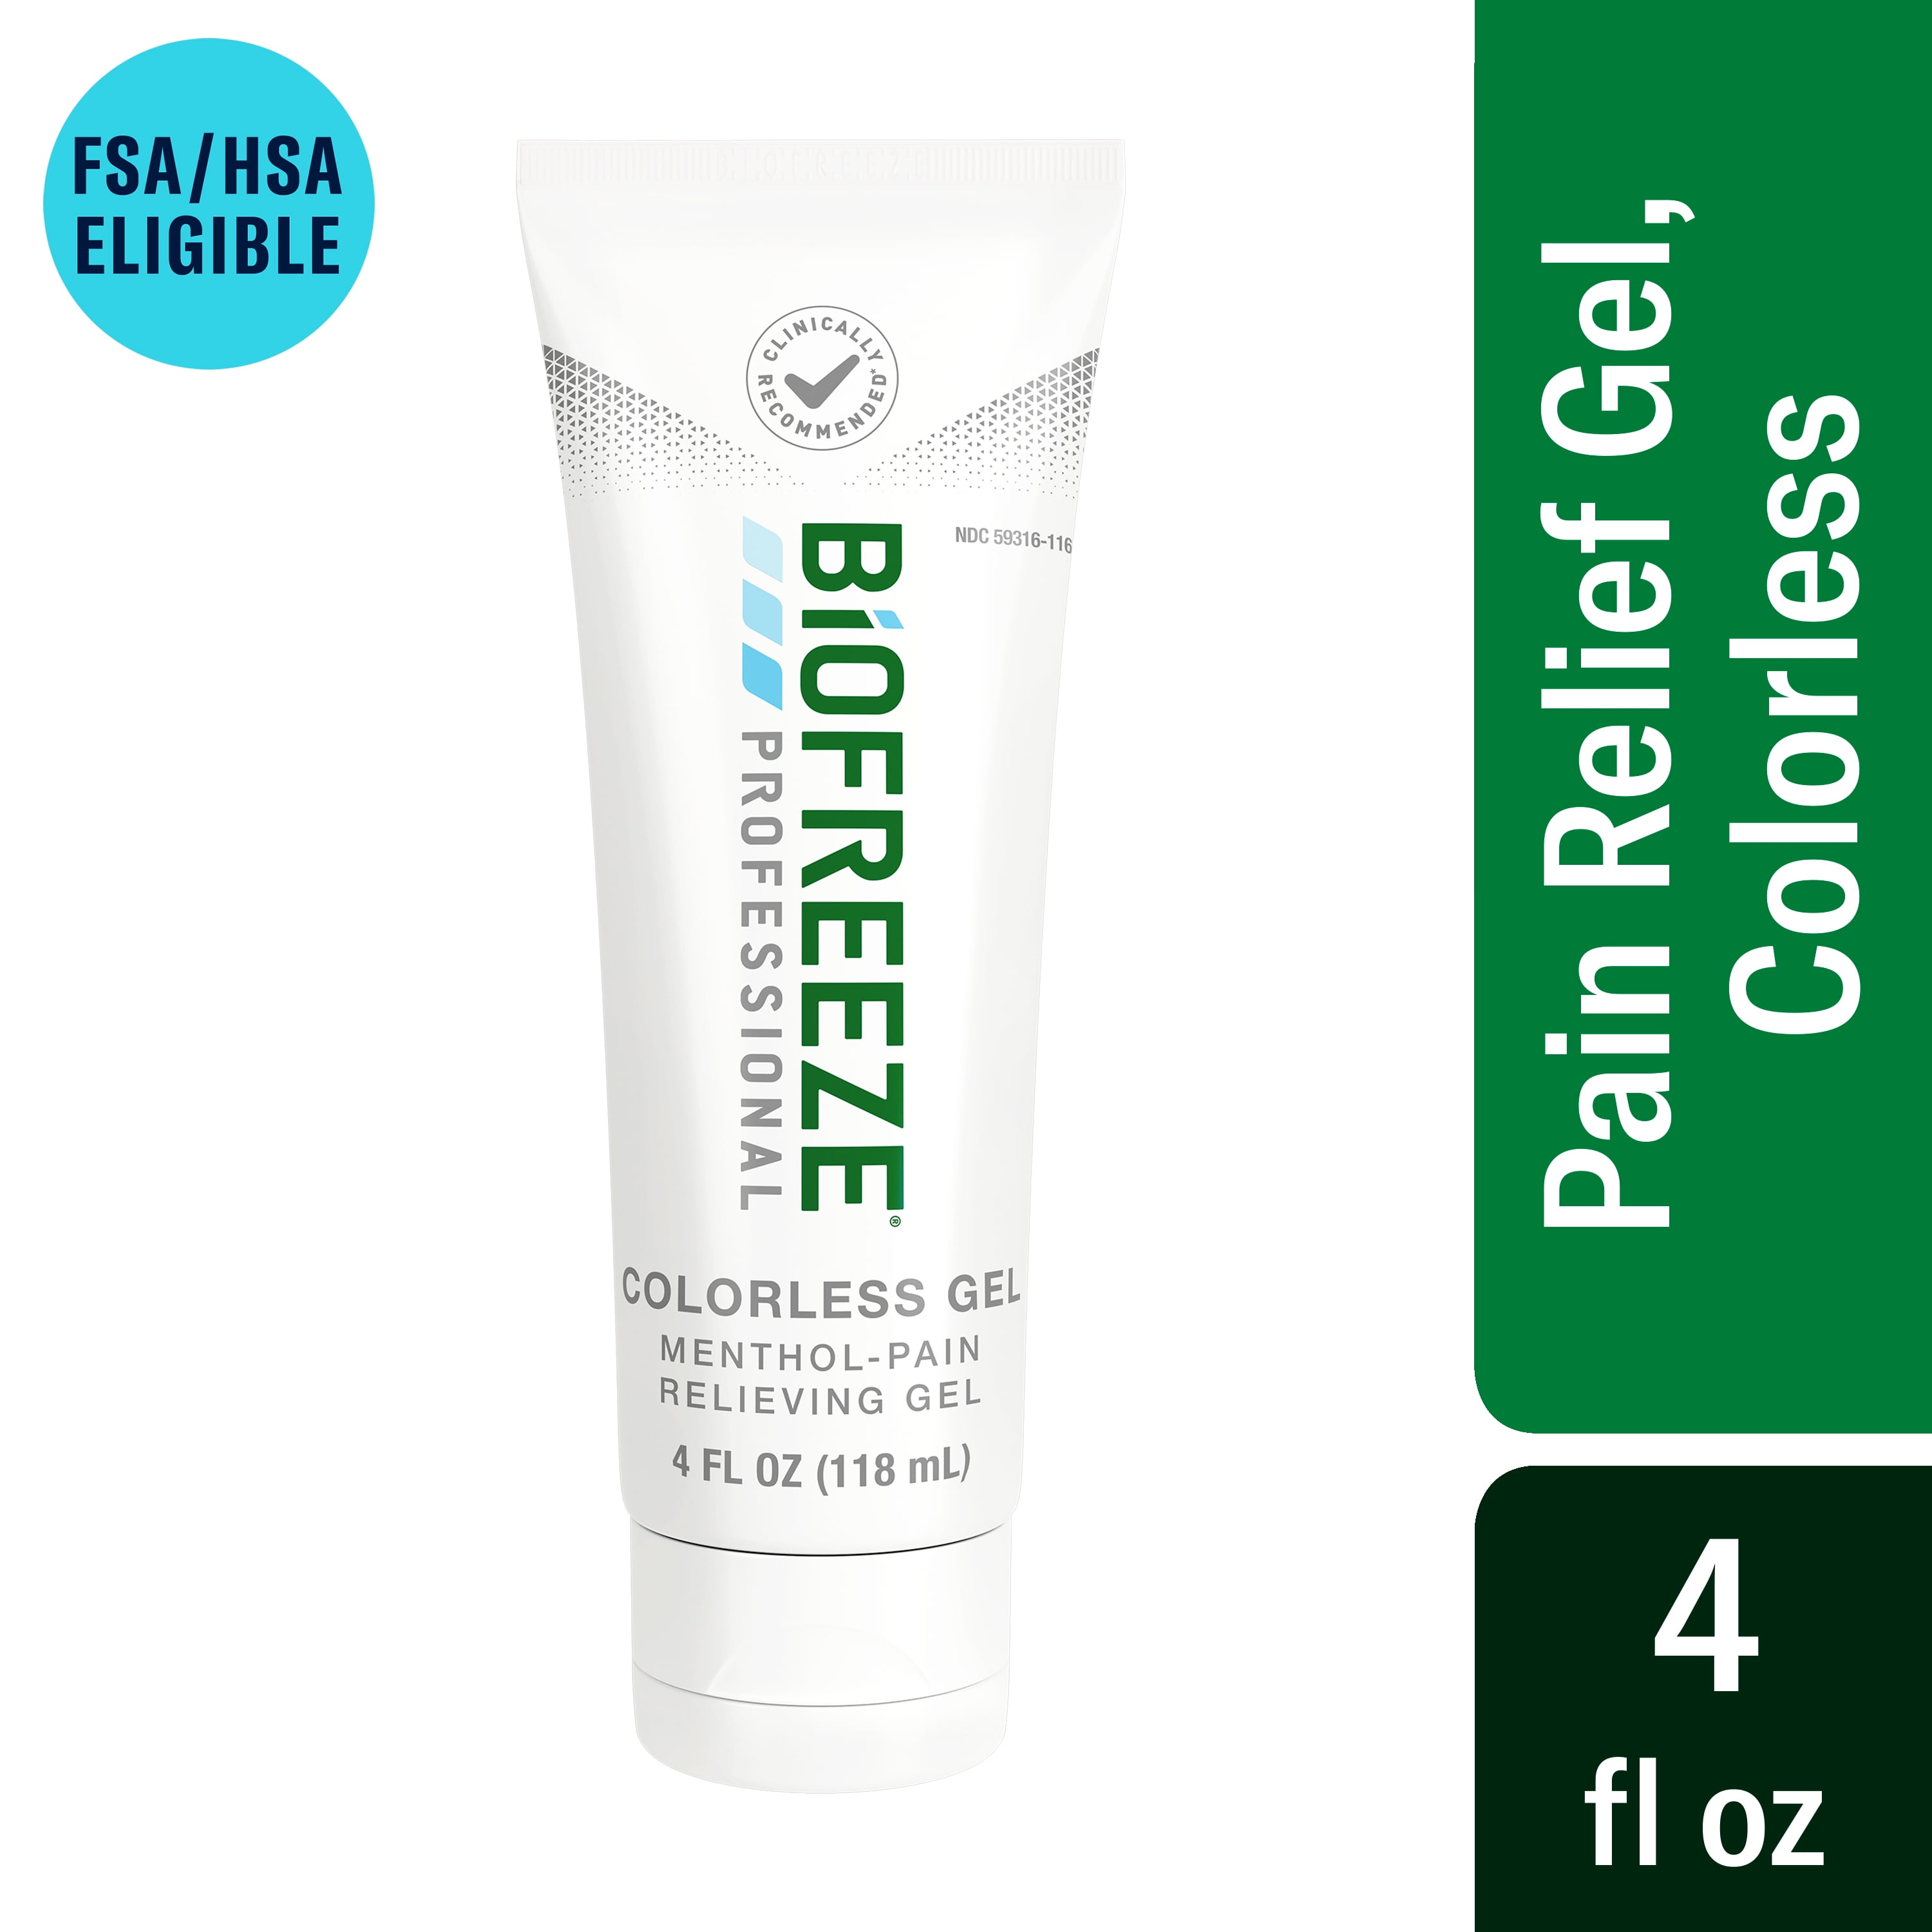 Biofreeze Professional Menthol Pain Relieving Gel Colorless Gel 4